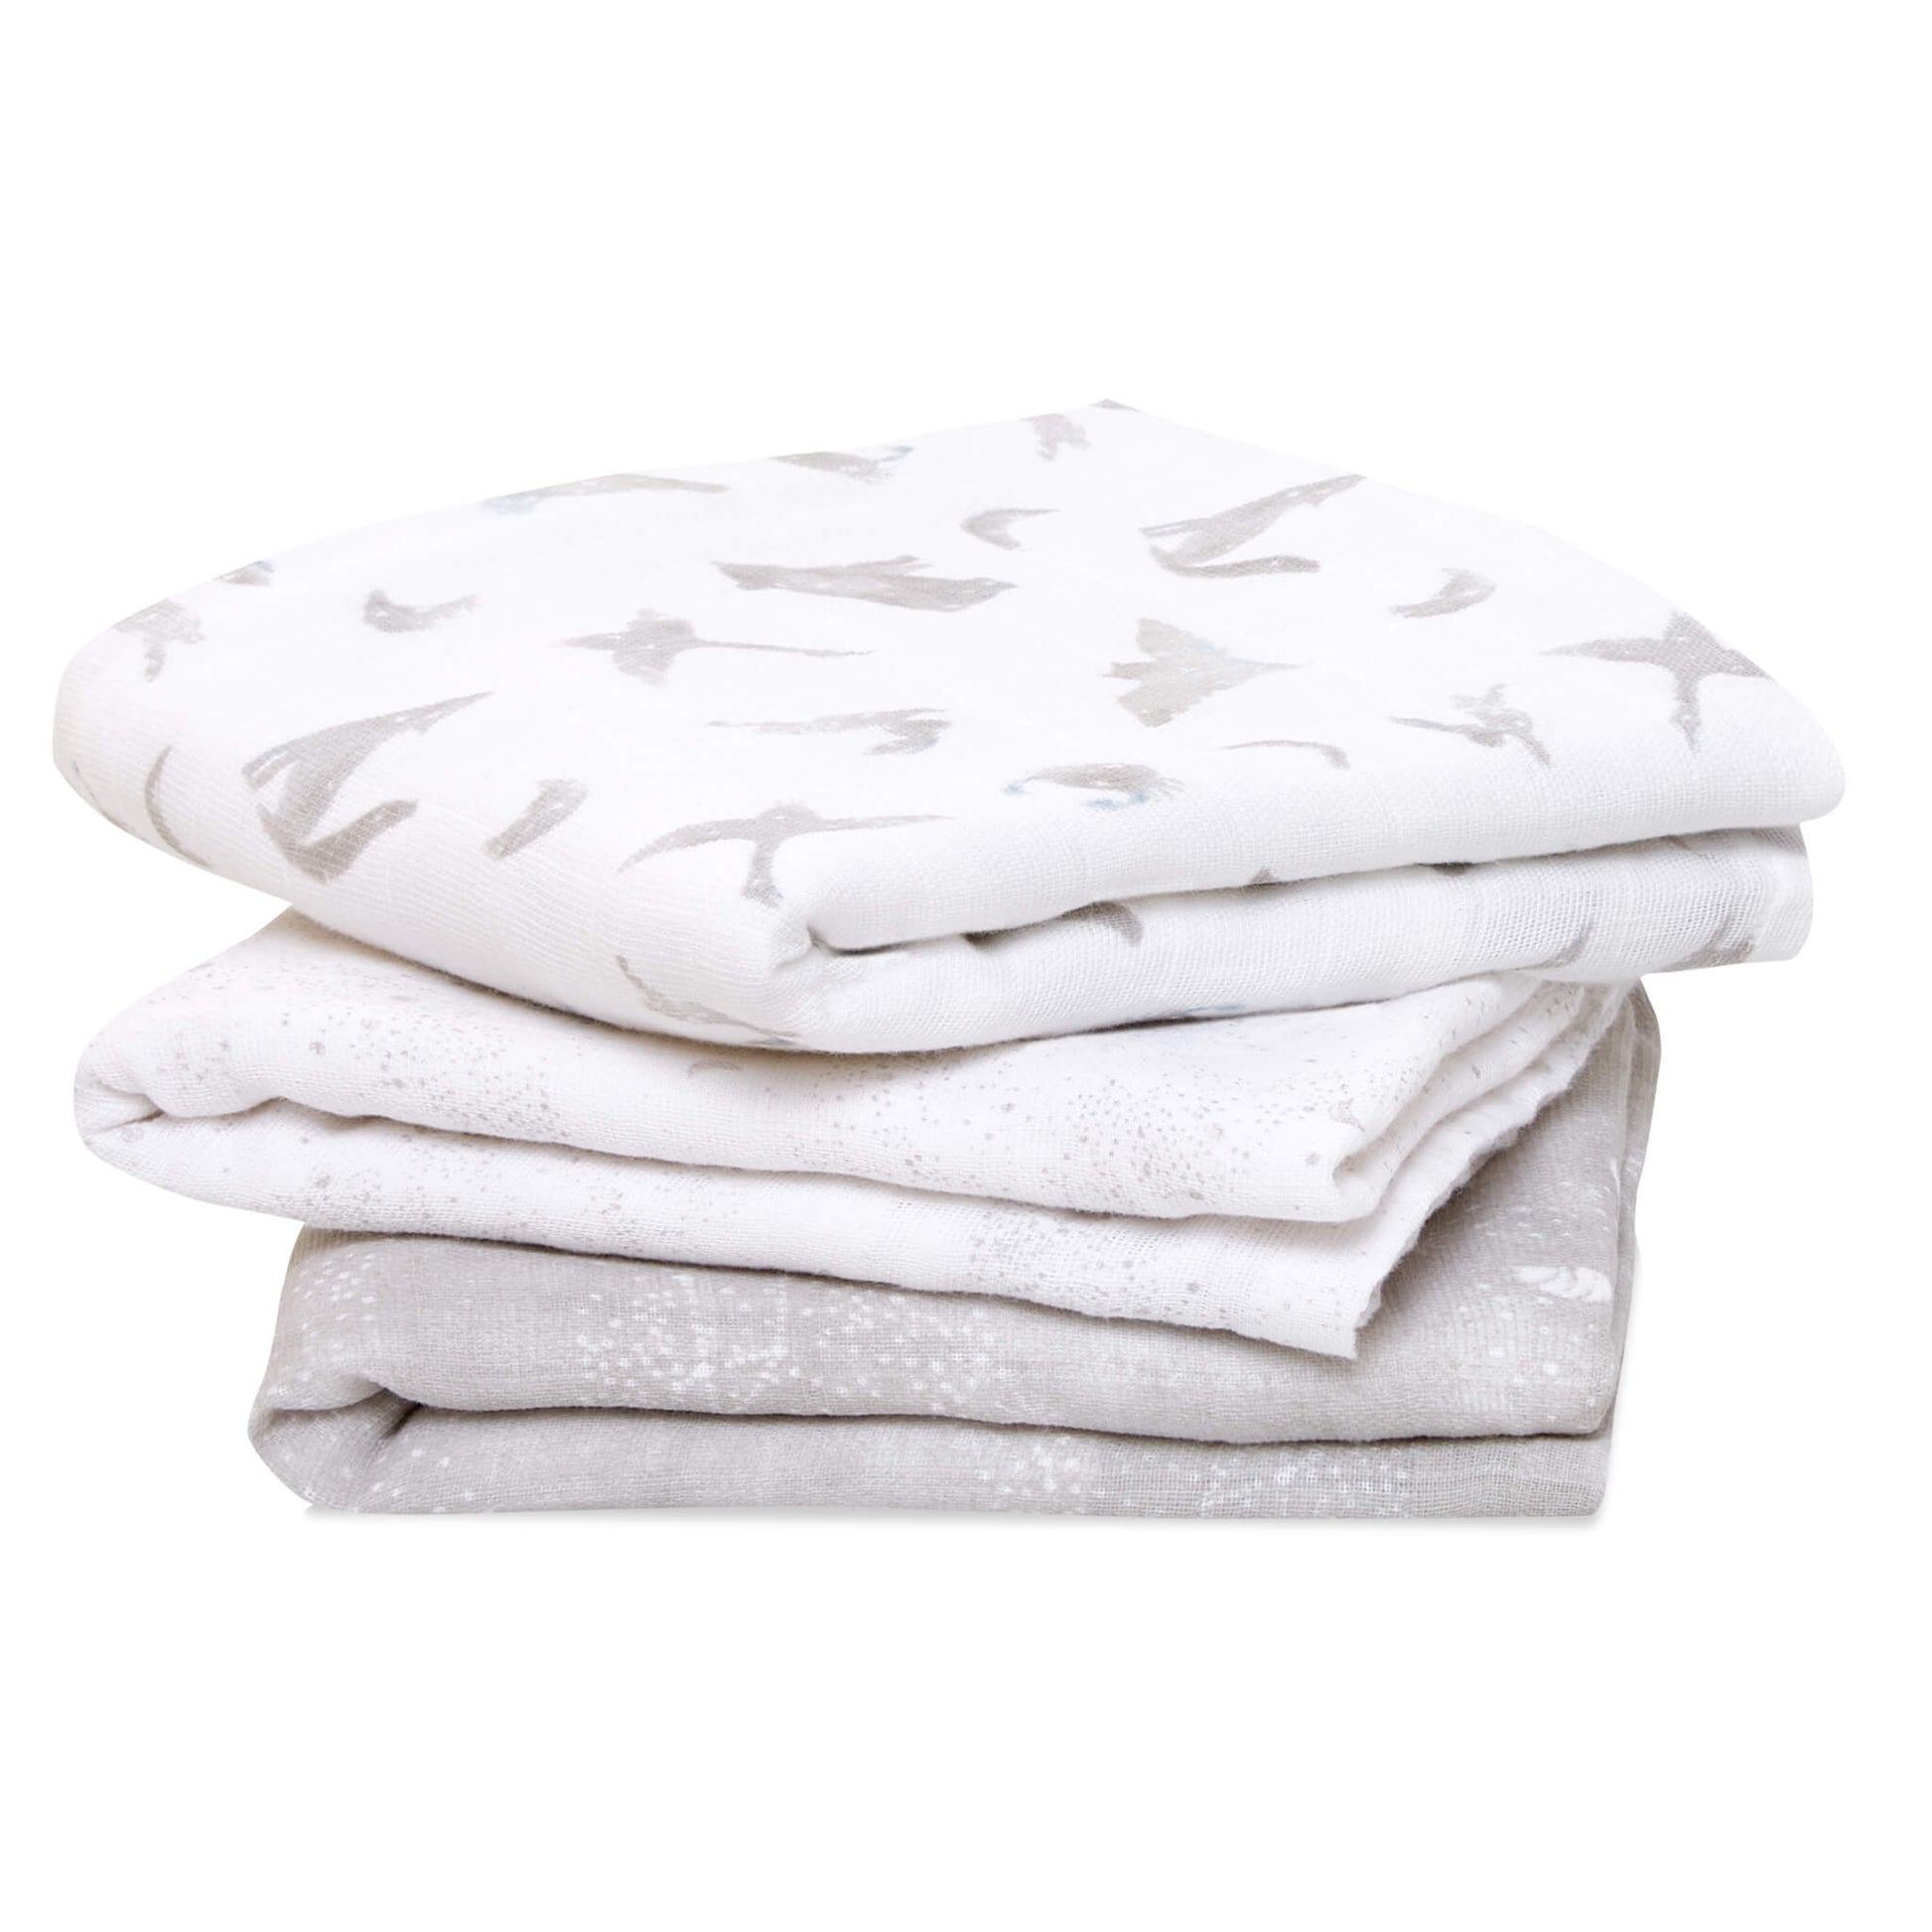 Aden + anais 100% organic cotton muslin musy® squares are perfectly sized for life on the go. Soft, breathable and absorbent, they’re the do it all baby necessity.